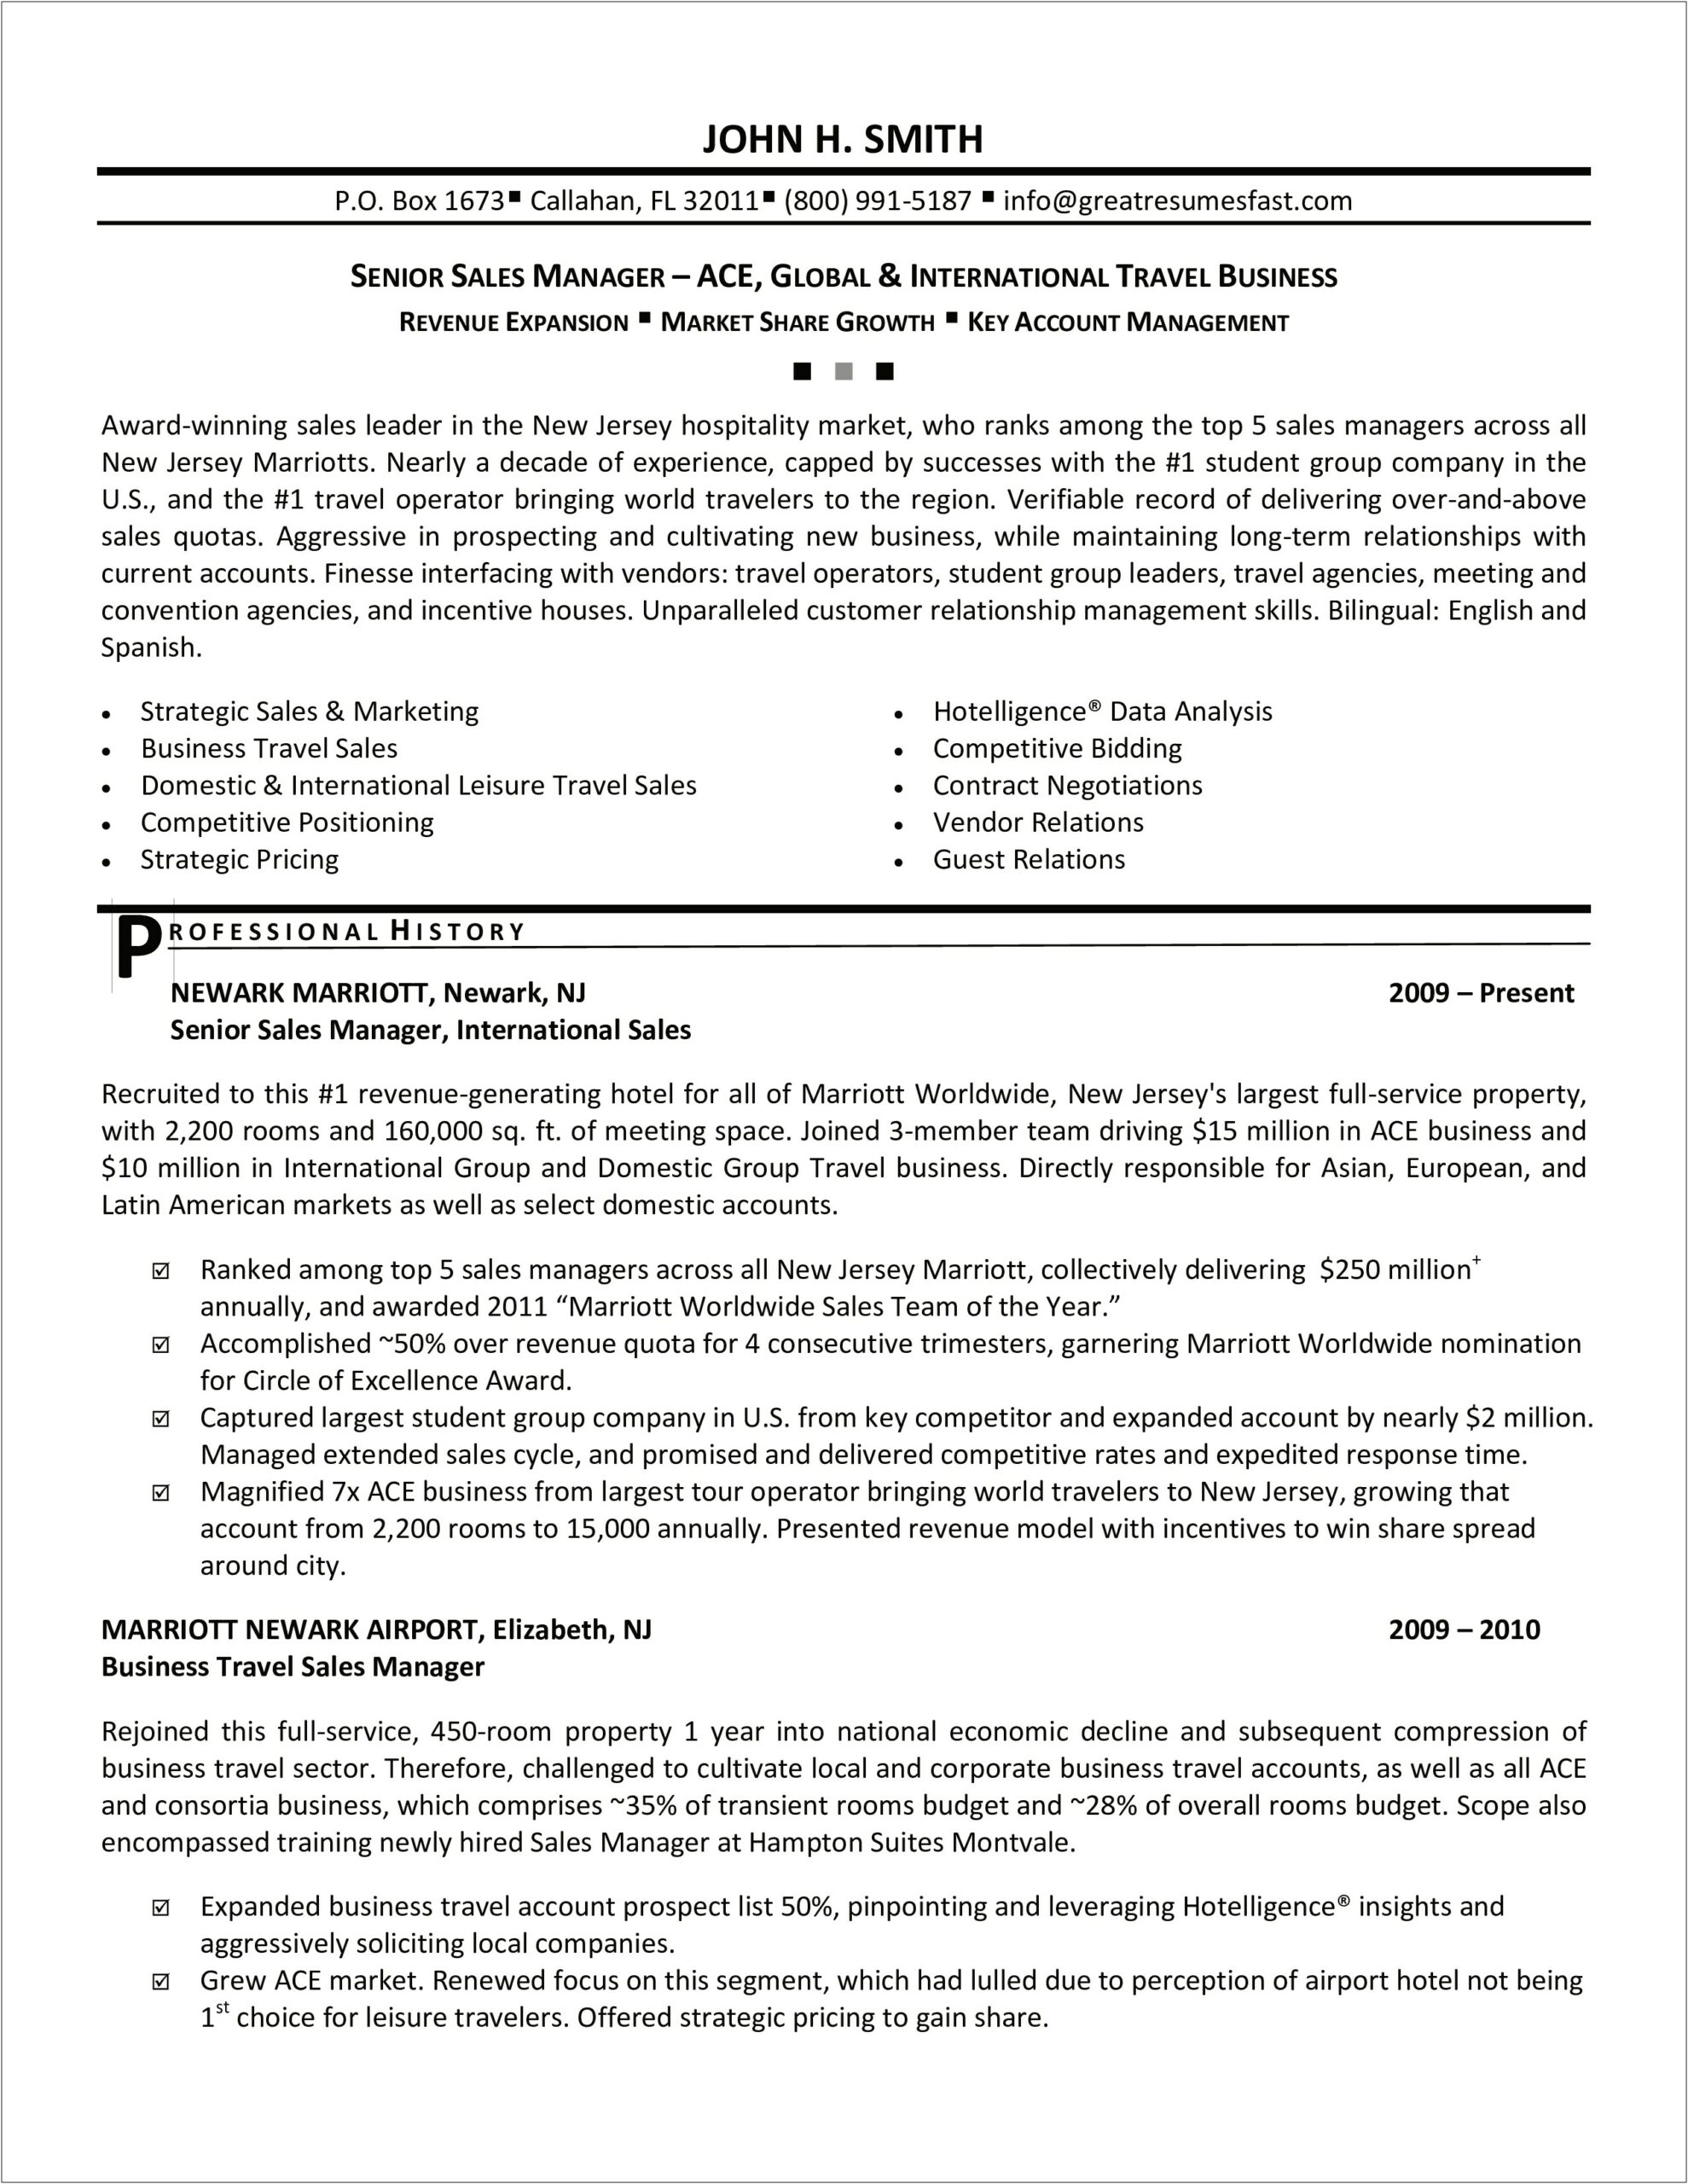 Resumes For Revenue Managers At Marriott